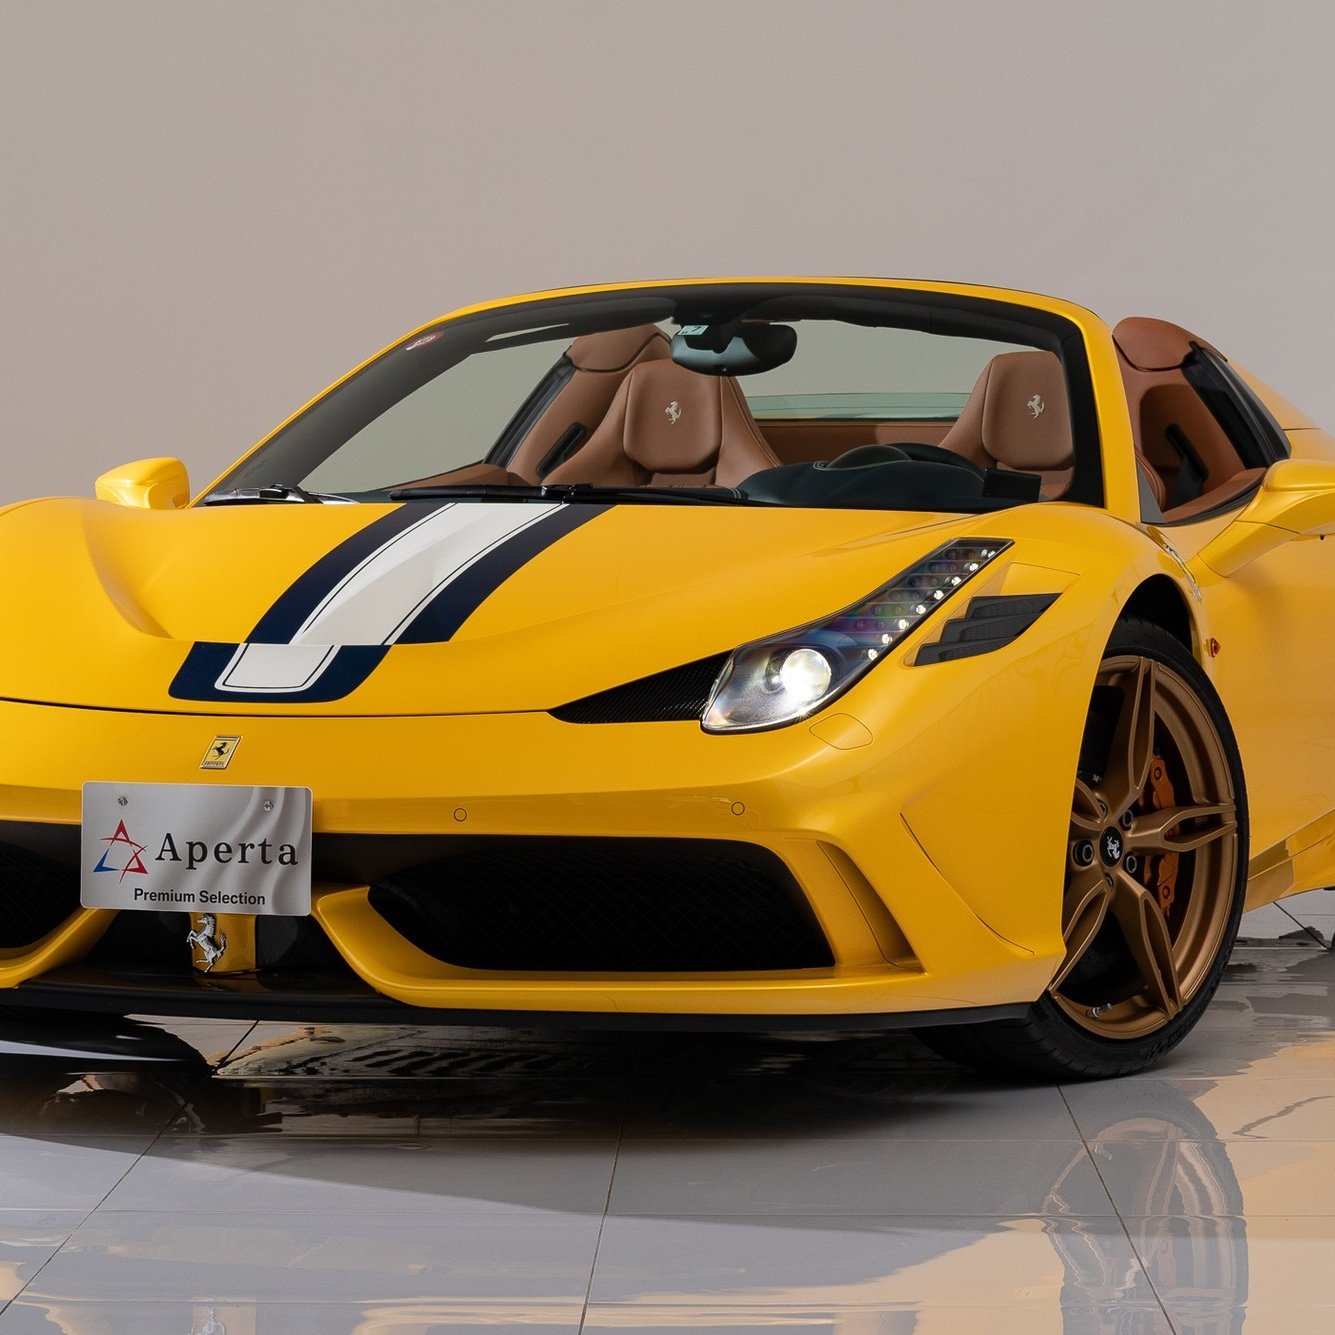 Top 10 Most Expensive Ferrari Cars In The World In 2020